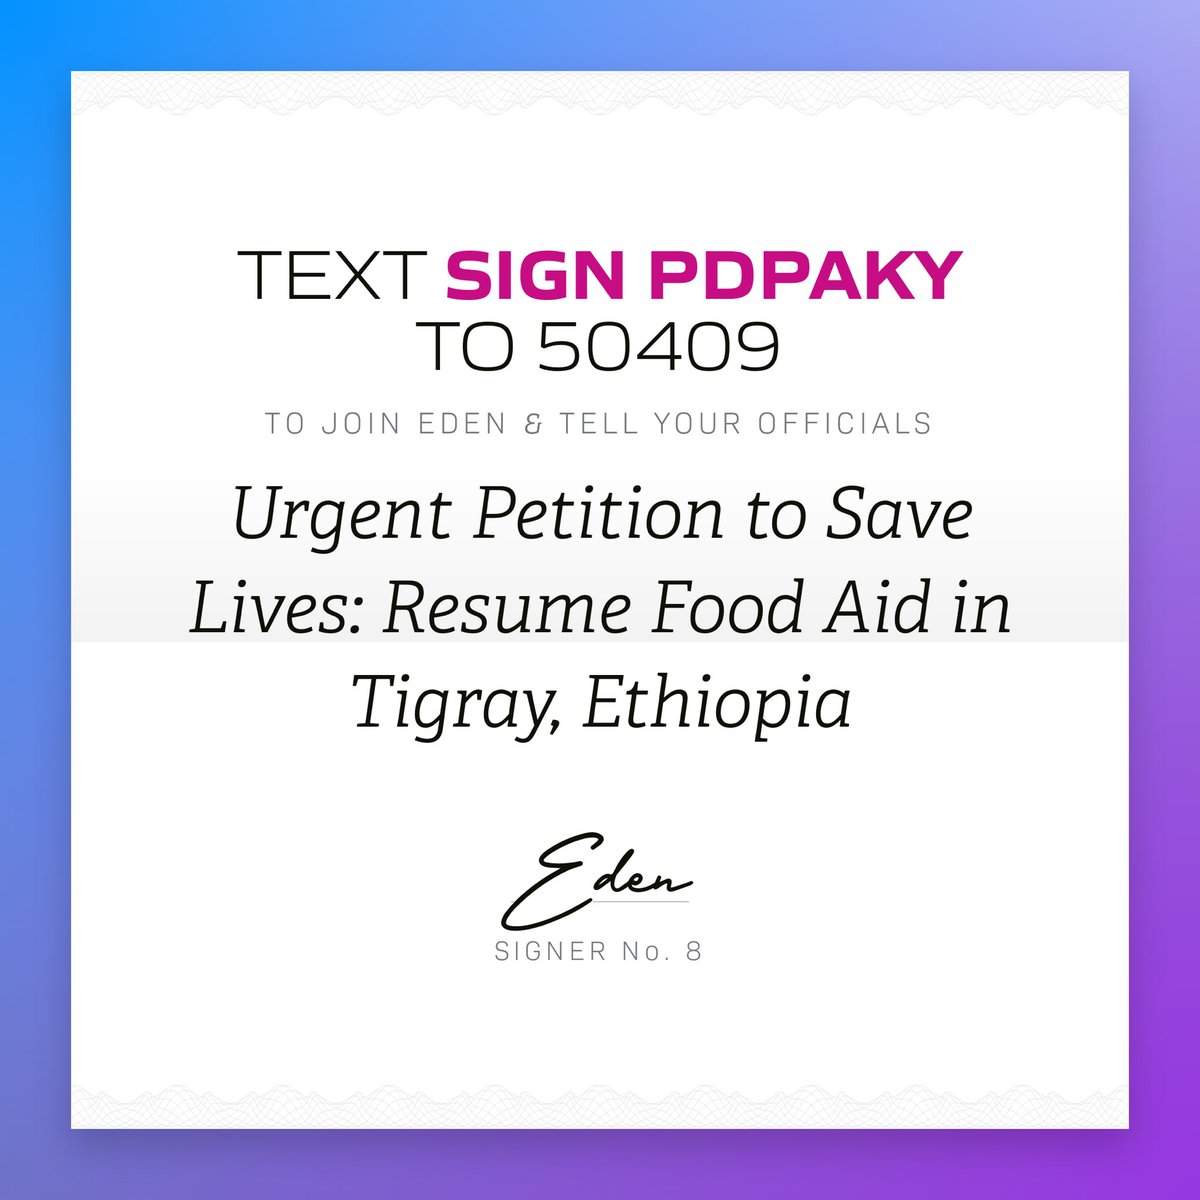 🚨 Denying food aid to over 5.4mil represents a disproportionate response … in Aug, Sept, & Oct alone, 2,800 have died of starvation in 27 districts of #Tigray. @USAID & @WFP must Prioritize Humanity! #ResumeAid4Tigray #TigrayCantWait ✍️ resist.bot/petitions/PDPA…